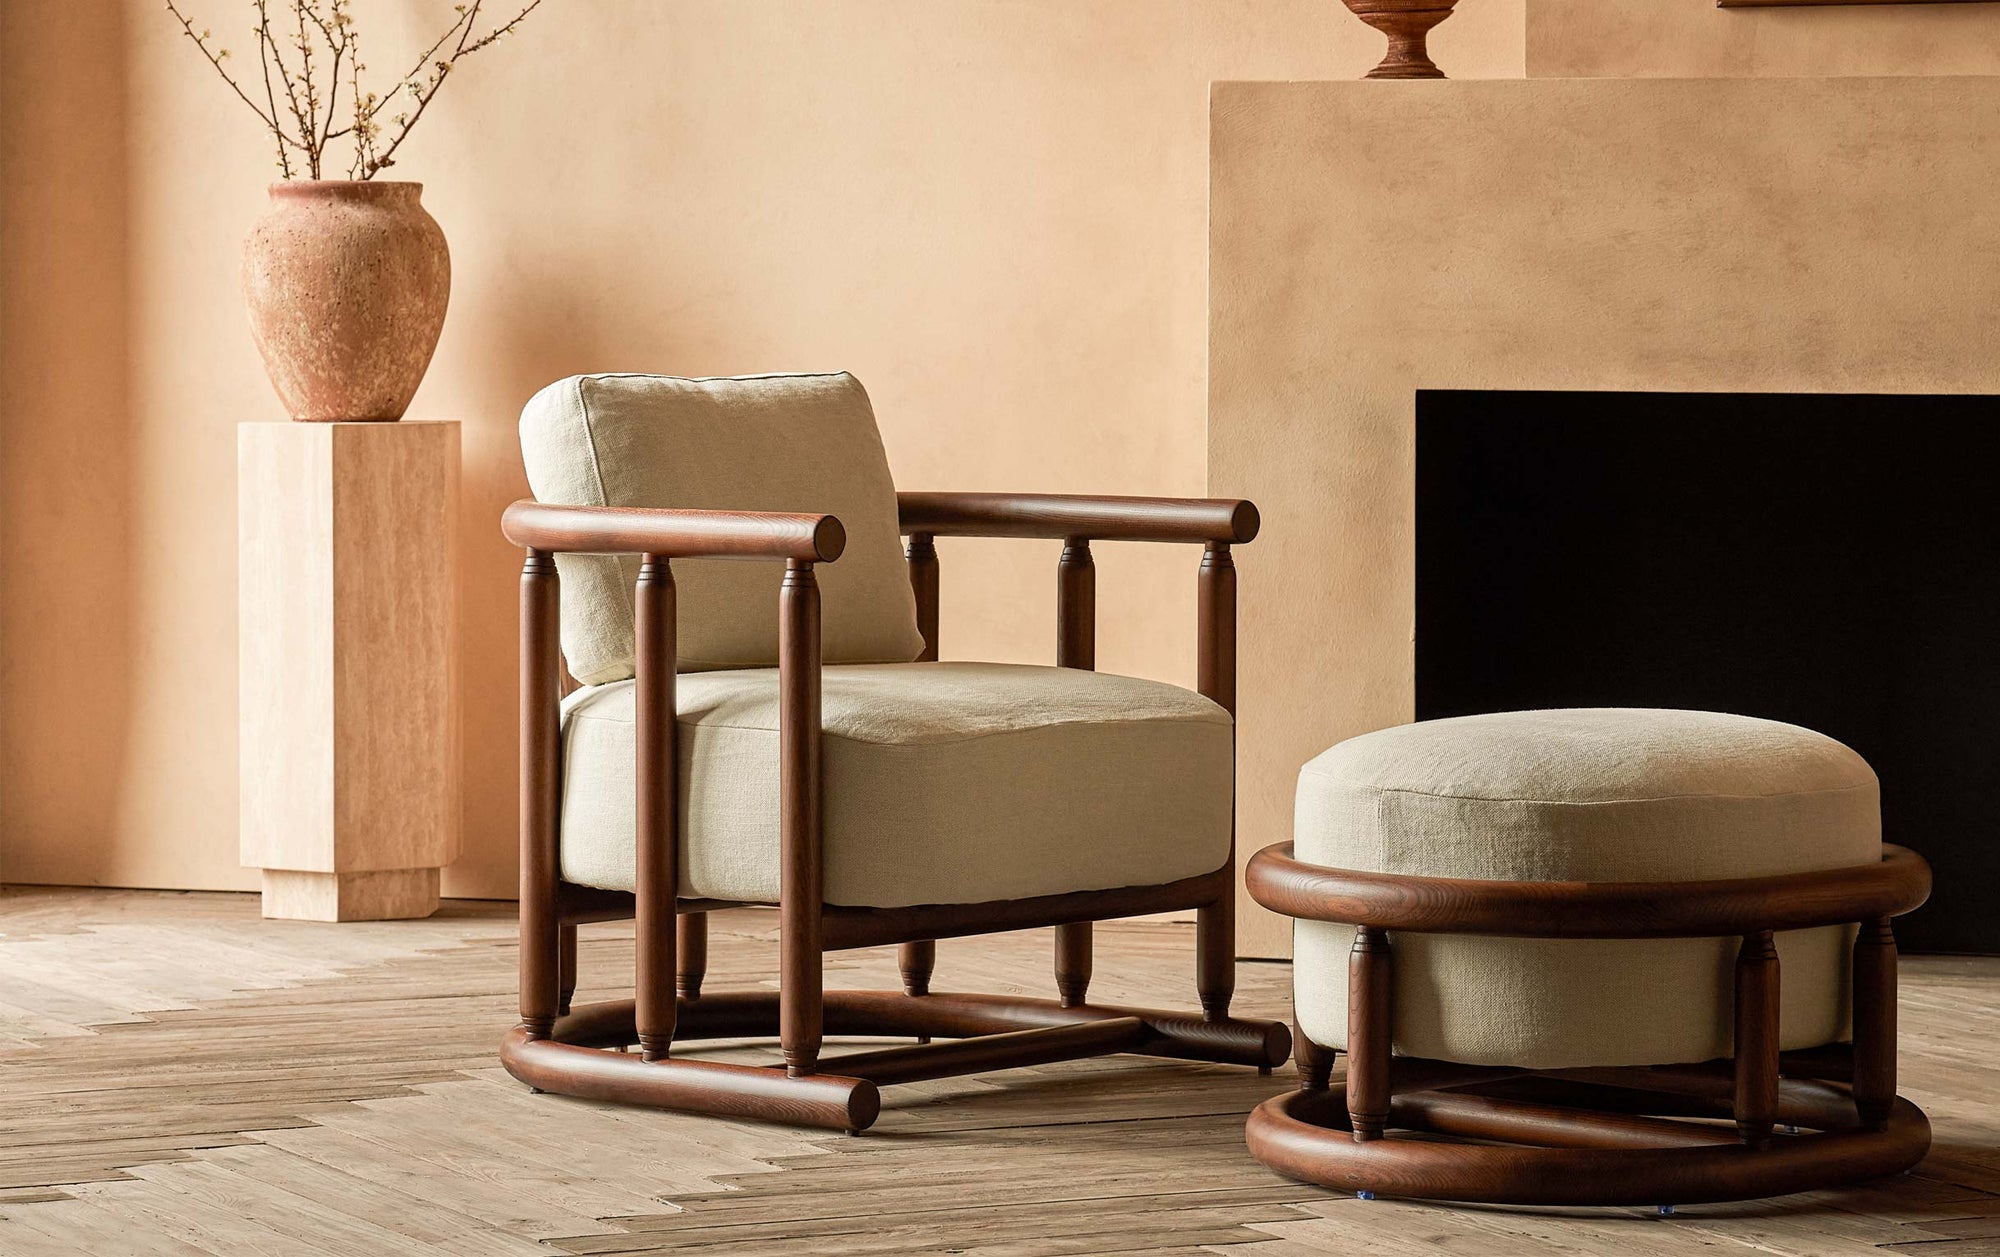 Bene Chair in Dusky Ash, a deep, rich, molasses-colored 100% American ash, and Warm Oatmeal, a light warm beige Medium Weight Linen, placed in a warmly lit room with matching Bene Ottoman, in front of a fireplace and a potted plant on a stone pedestal